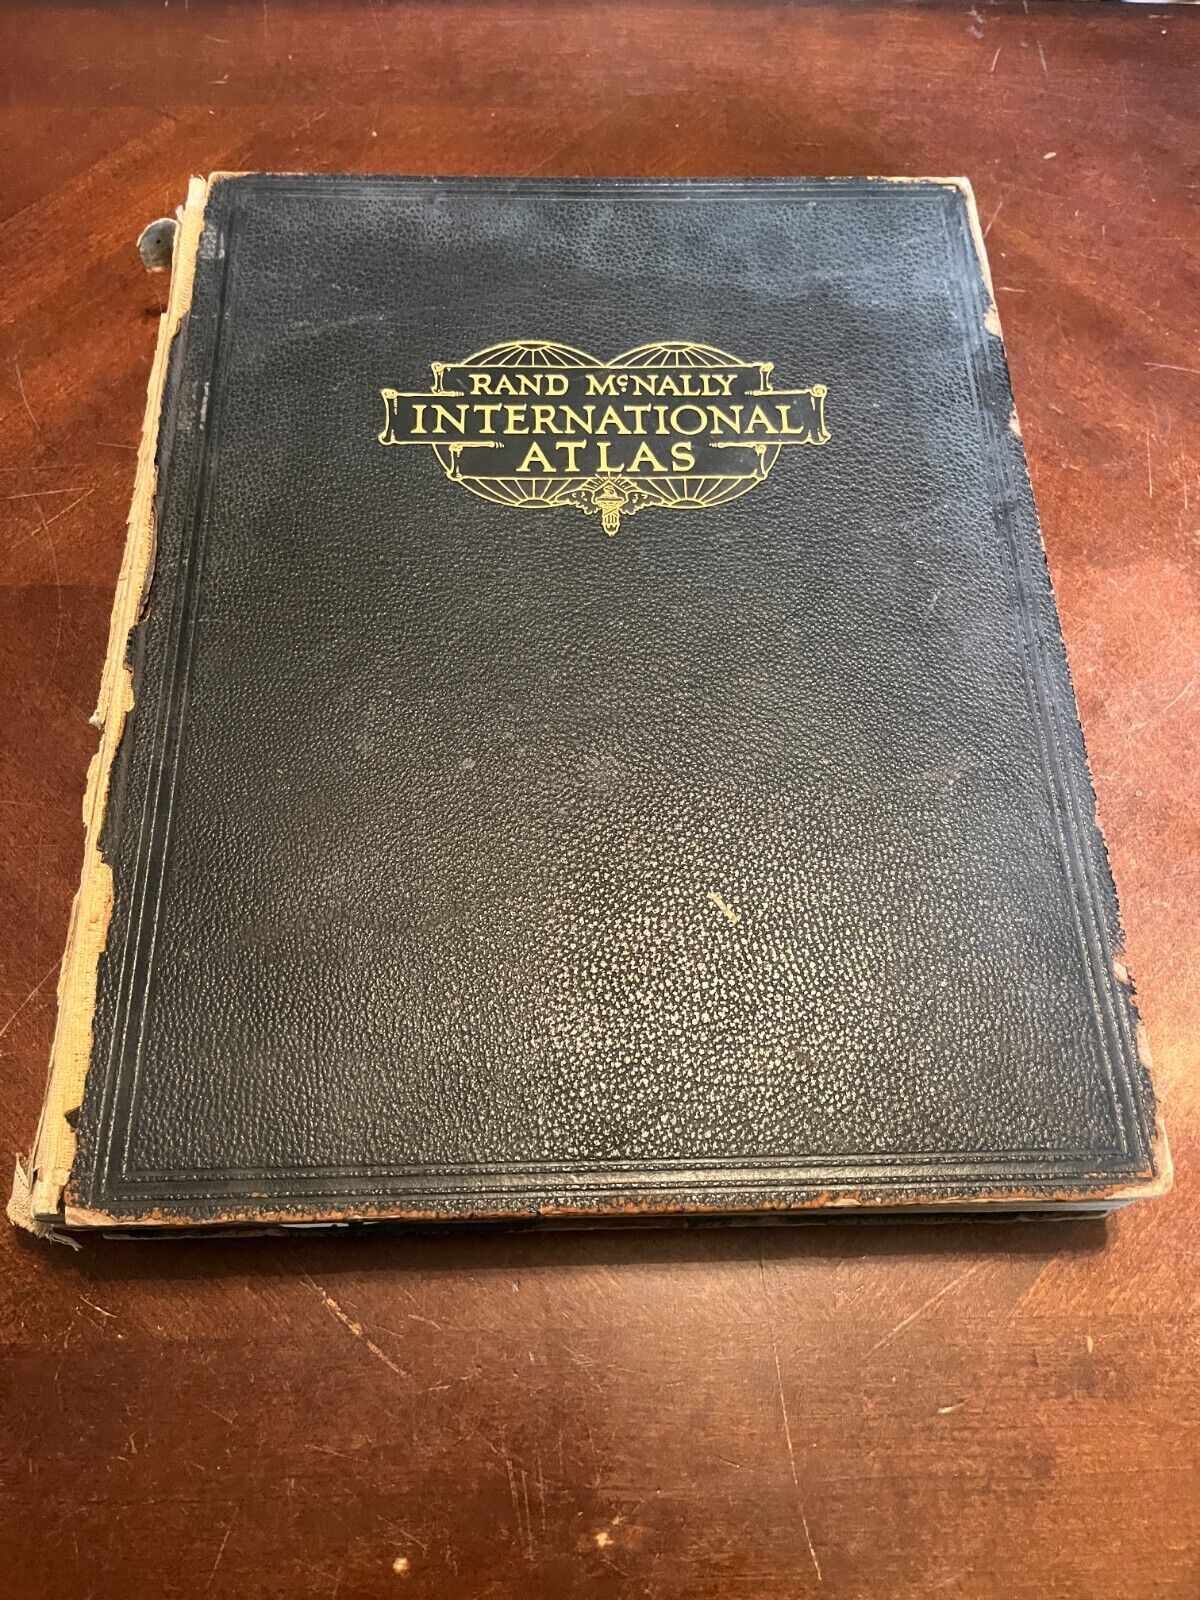 Antique 1926 Rand McNally International Atlas of the World Map Book Excellent